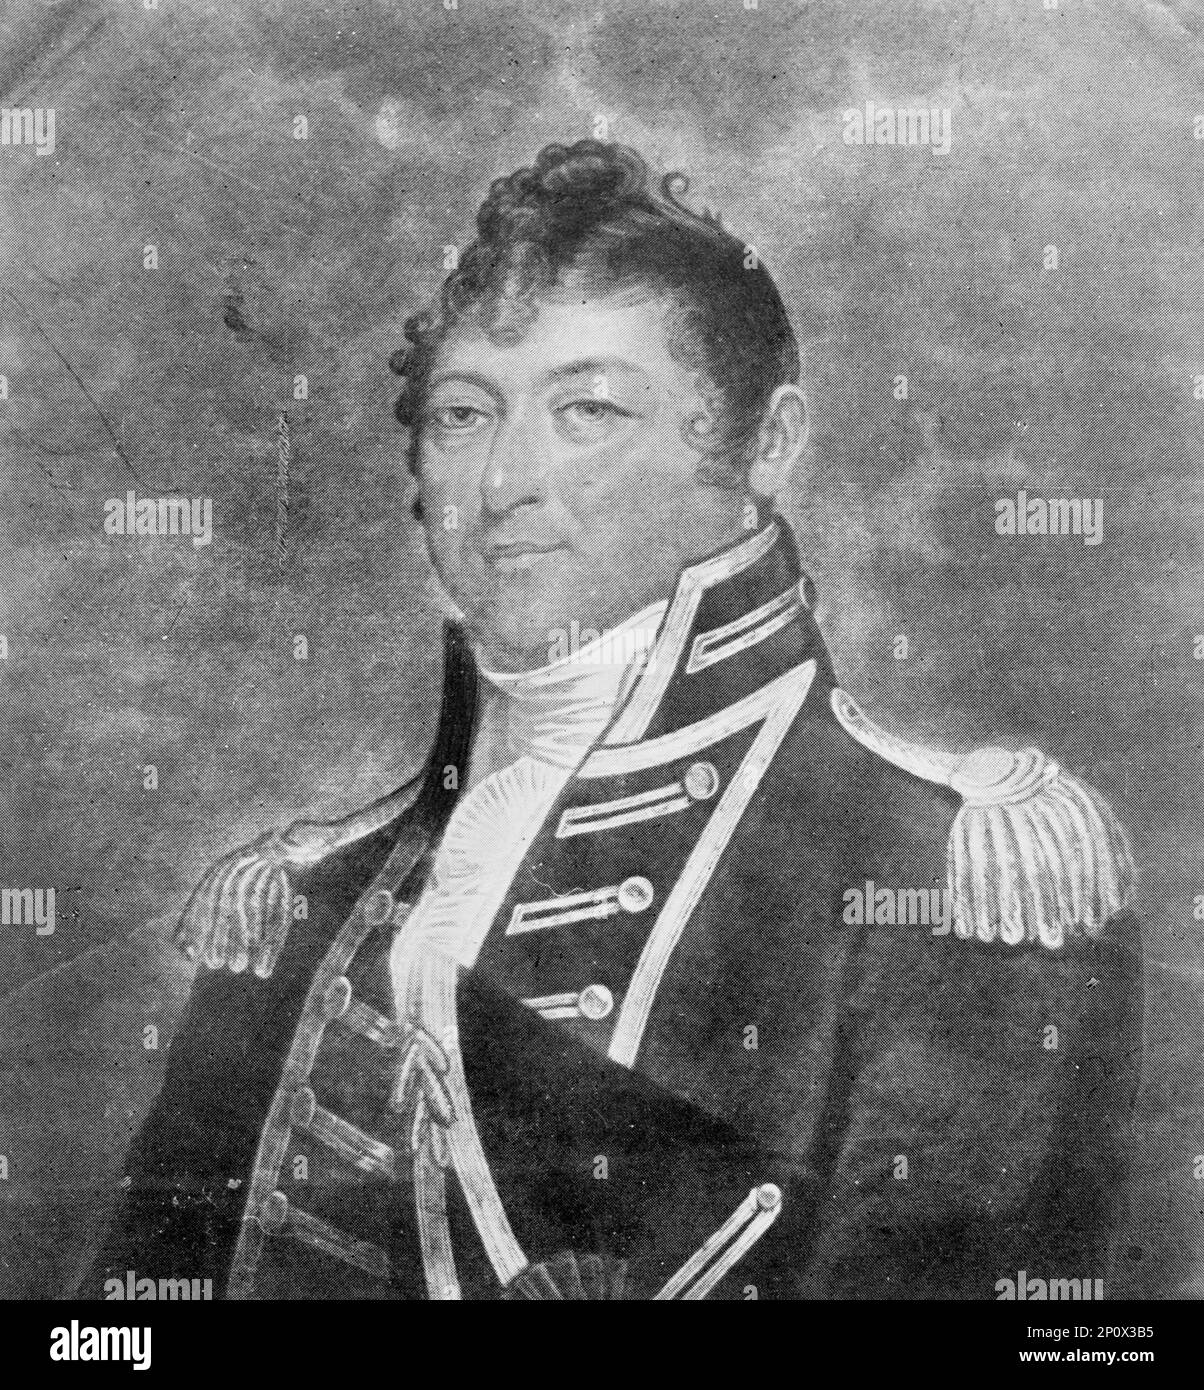 Captain Isaac Hull, U.S. Navy, (1917). Commodore, fought in the War of 1812. Stock Photo